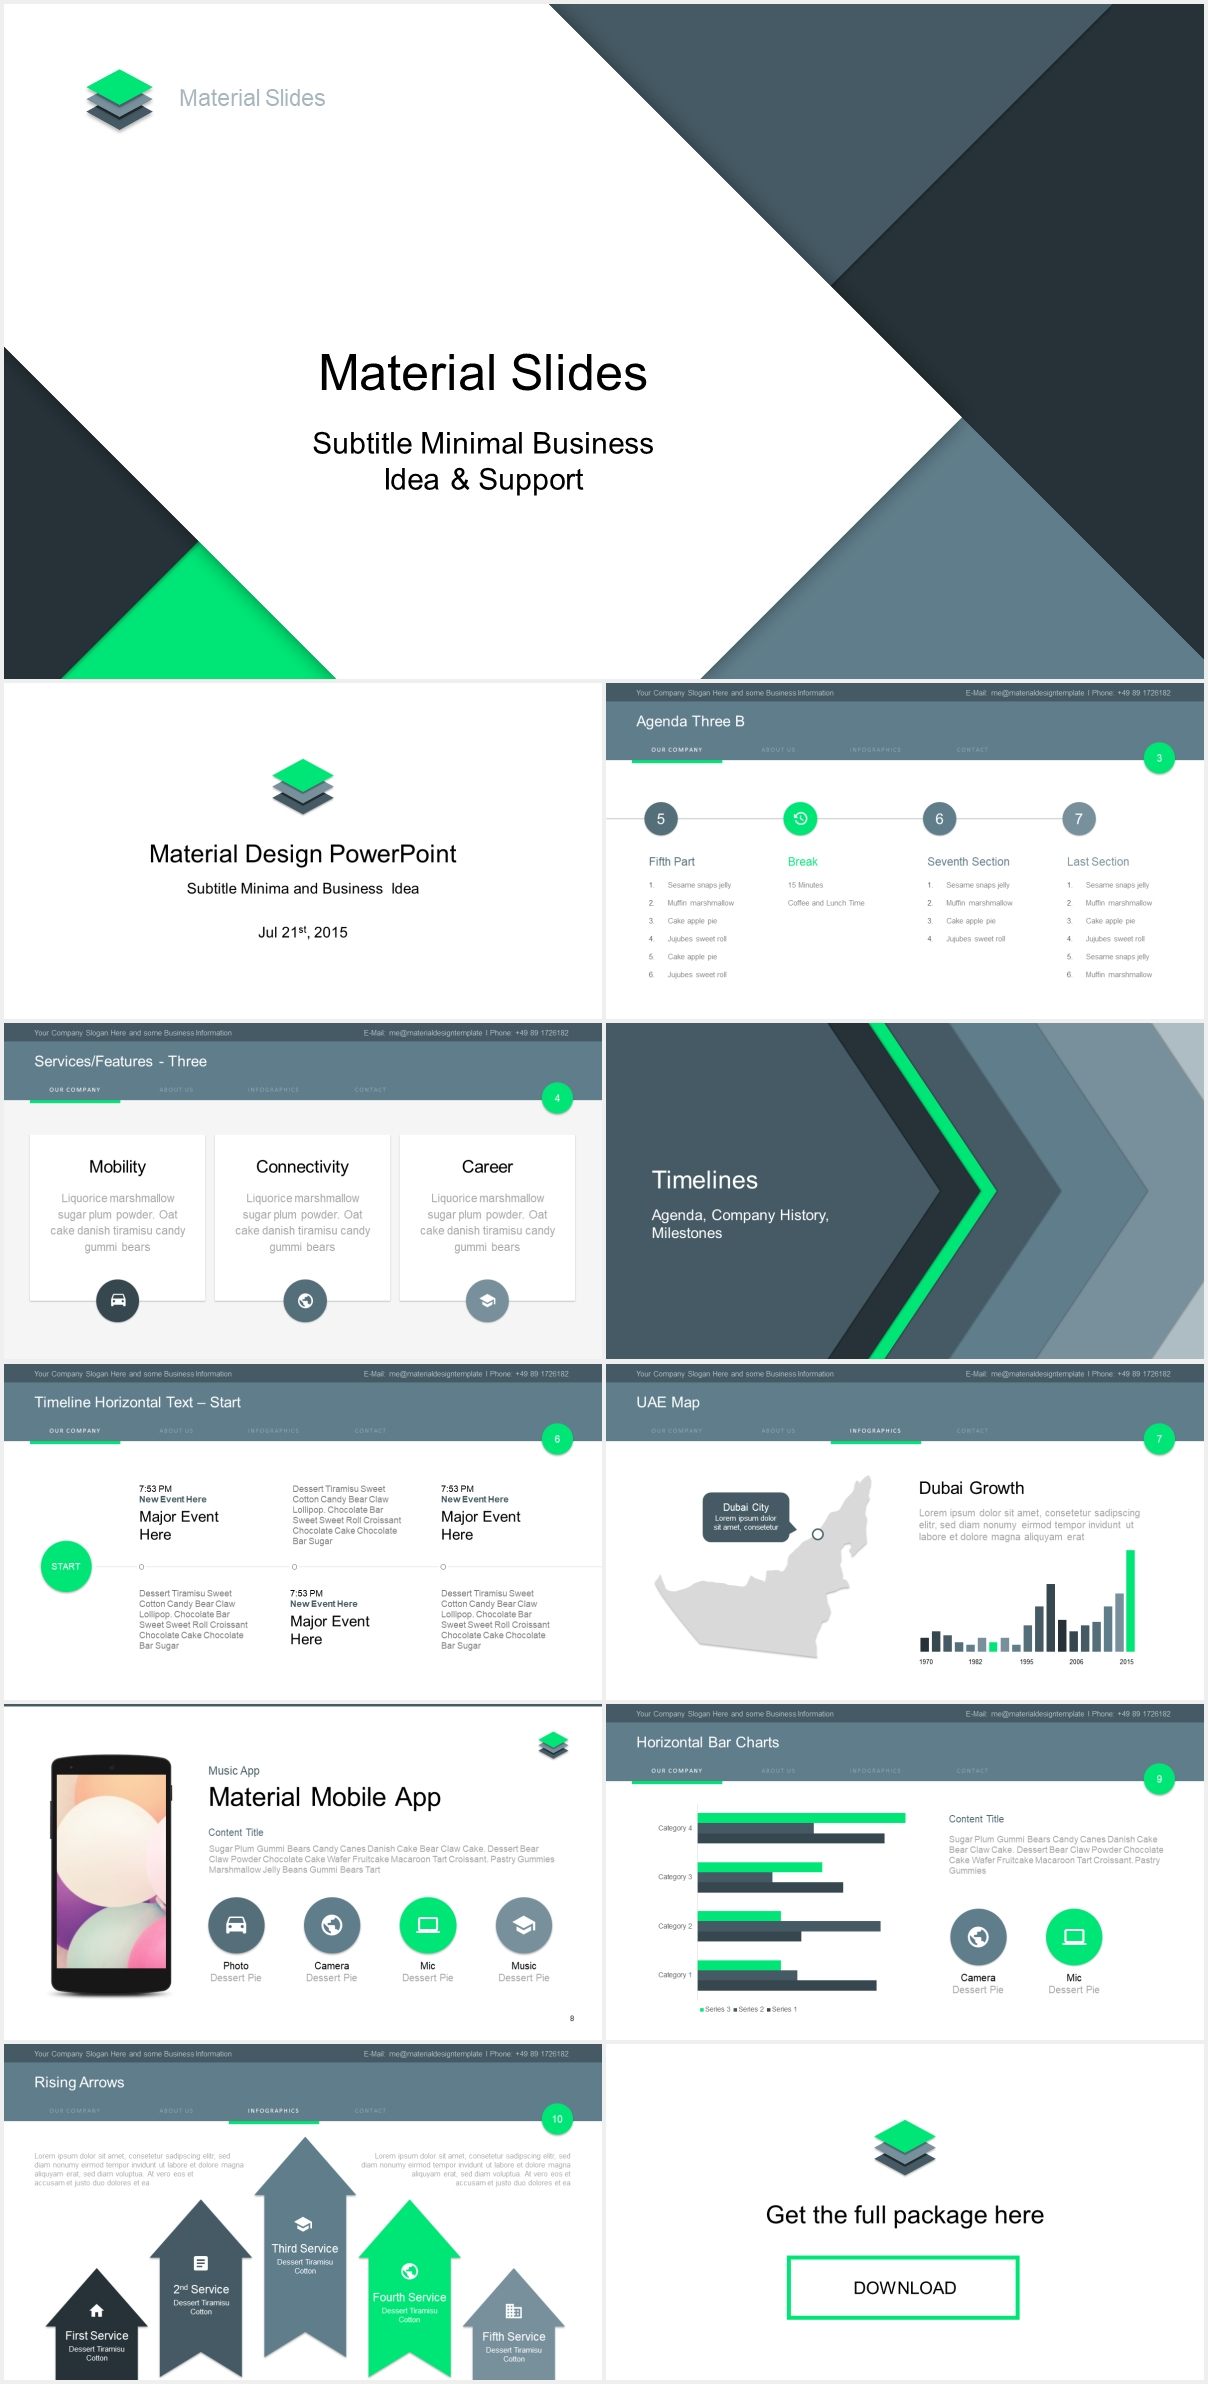 Material Design Powerpoint Template – Just Free Slides Intended For How To Design A Powerpoint Template